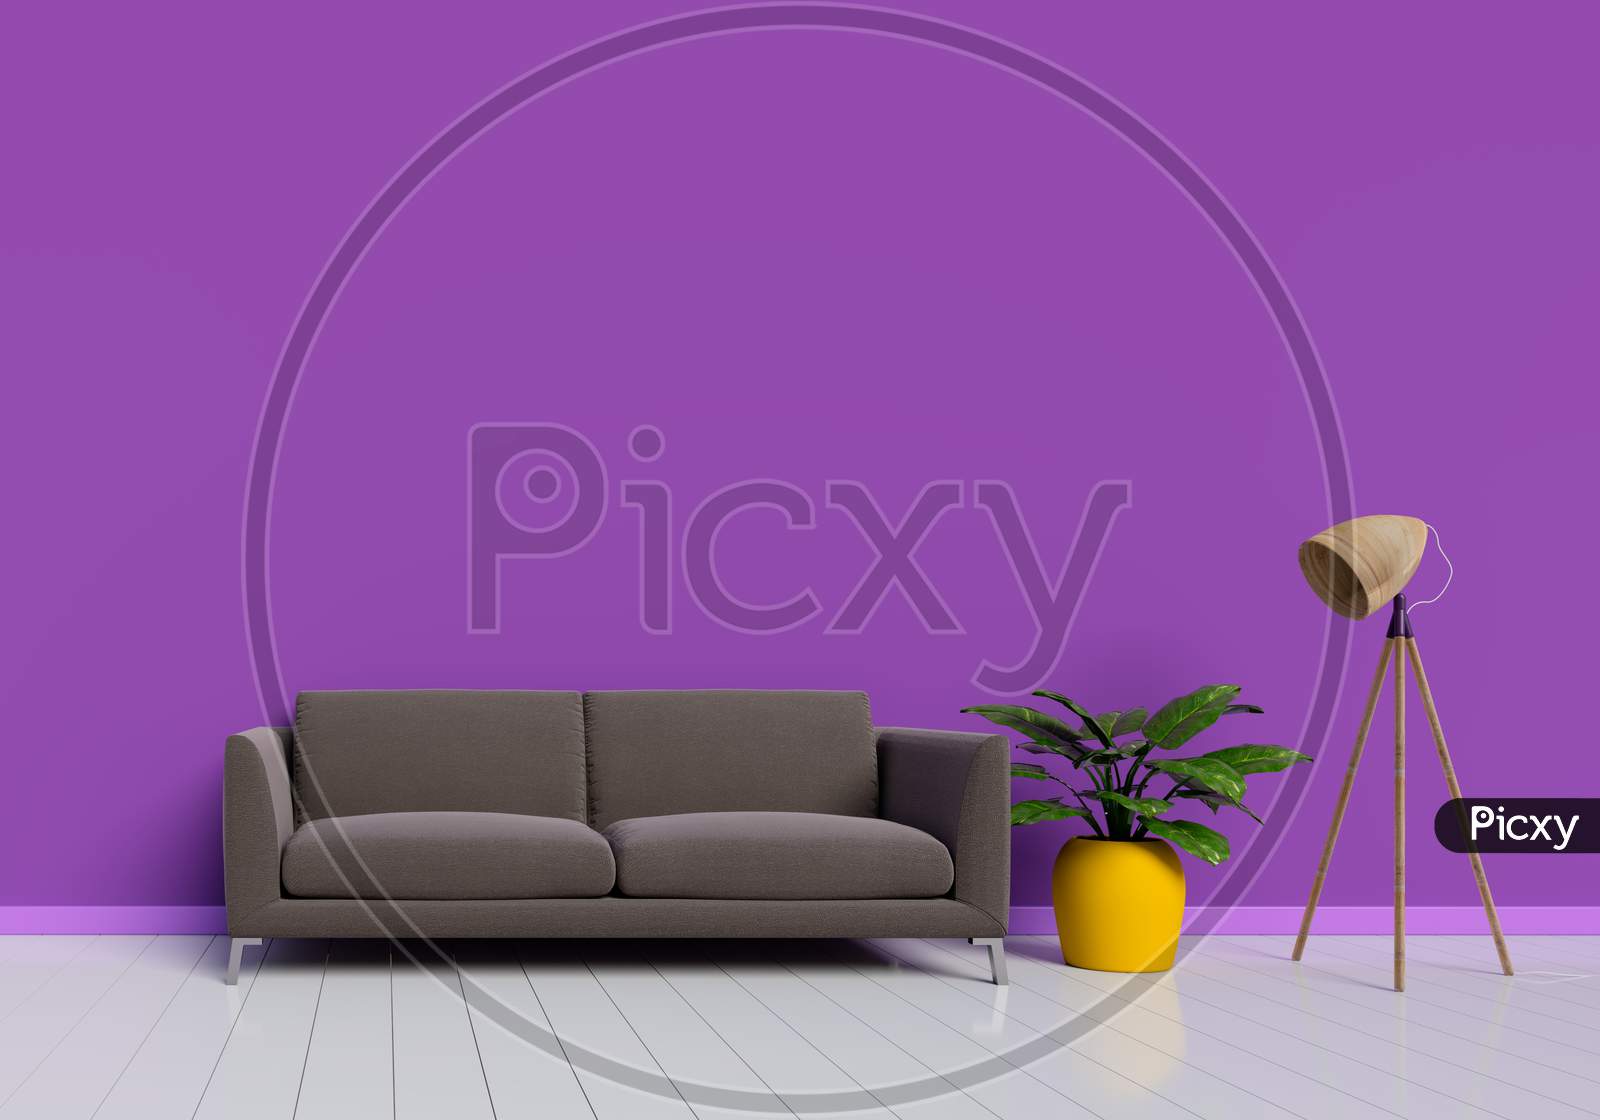 Modern Interior Design Of Purple Living Room With Brown Sofa And Yellow Plant Pot On White Glossy Wooden Floor. Lamp Element. Home And Living Concept. Lifestyle Theme. 3D Illustration Rendering.